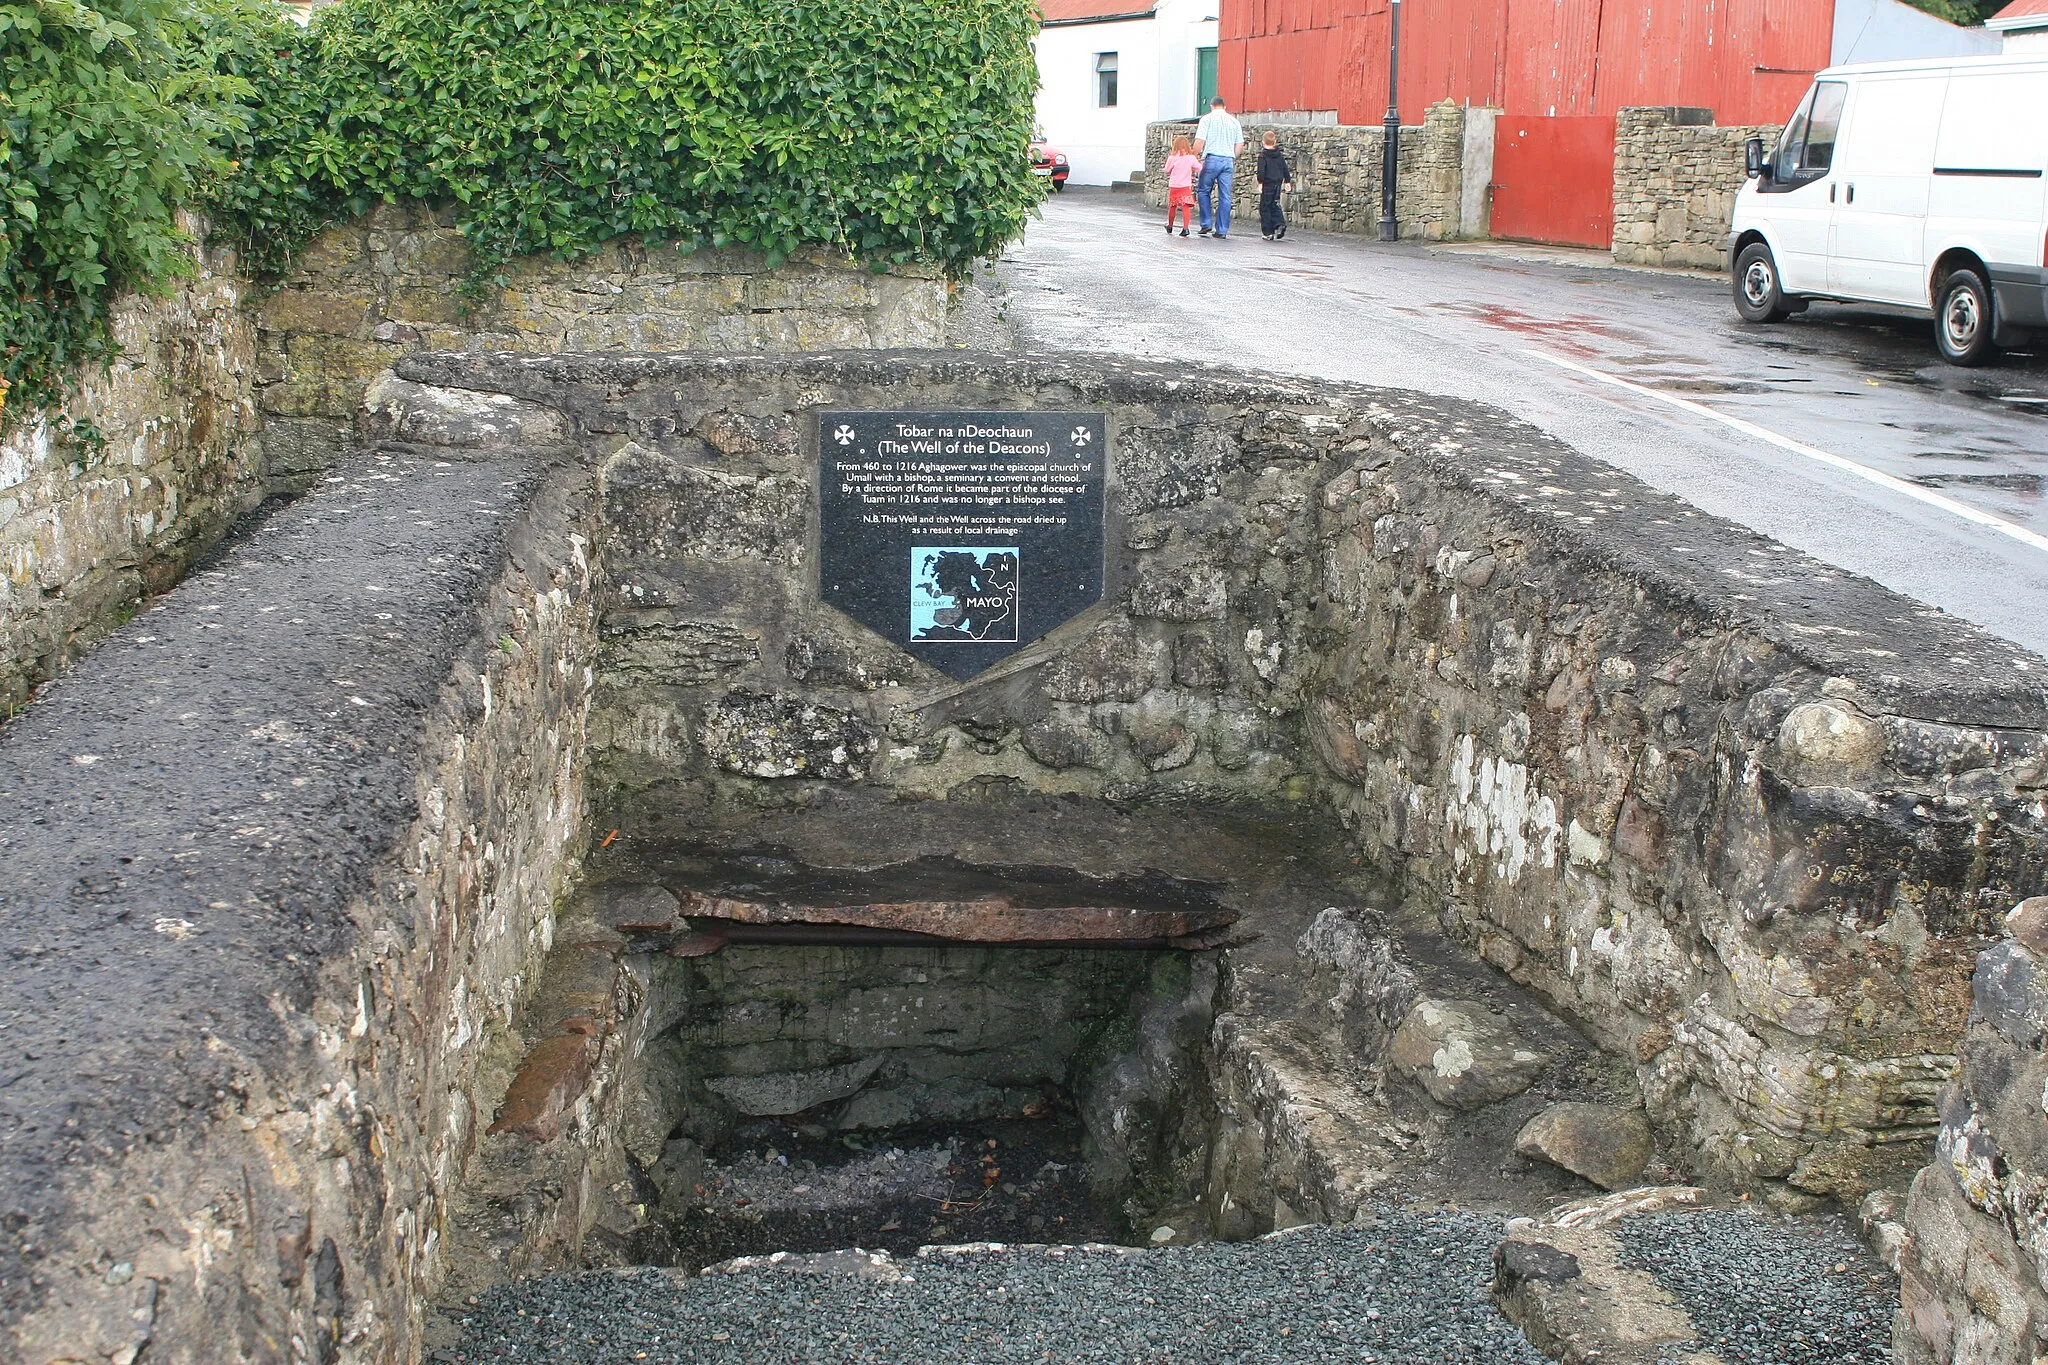 Photo showing: One of the two holy wells at Aghagower. The depicted plate reads: Tobar na nDeochaun (The Well of the Deacons): From 460 to 1216 Aghagower was the episcopal church of Umall with a bishop, a seminary a convent and school. By a direction of Rome it became part of the diocese of Tuam in 1216 and was no longer a bishops see. N.B. This Well and the Well across the road dried up as a result of local drainage.